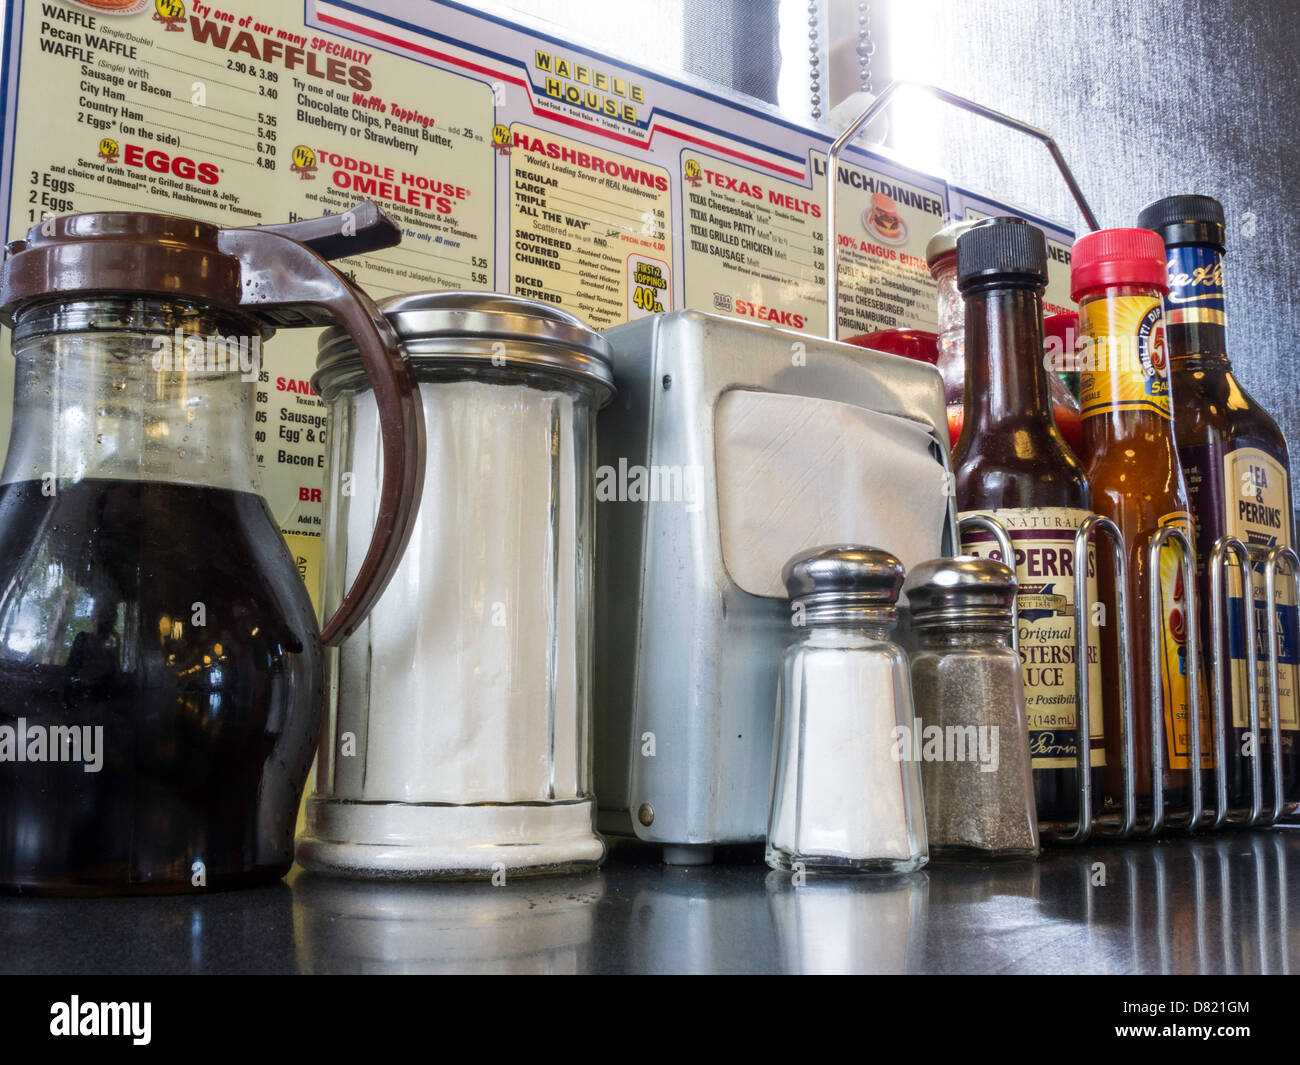 Table Top Condiments and Menu, Waffle House Restaurant, USA Stock Photo